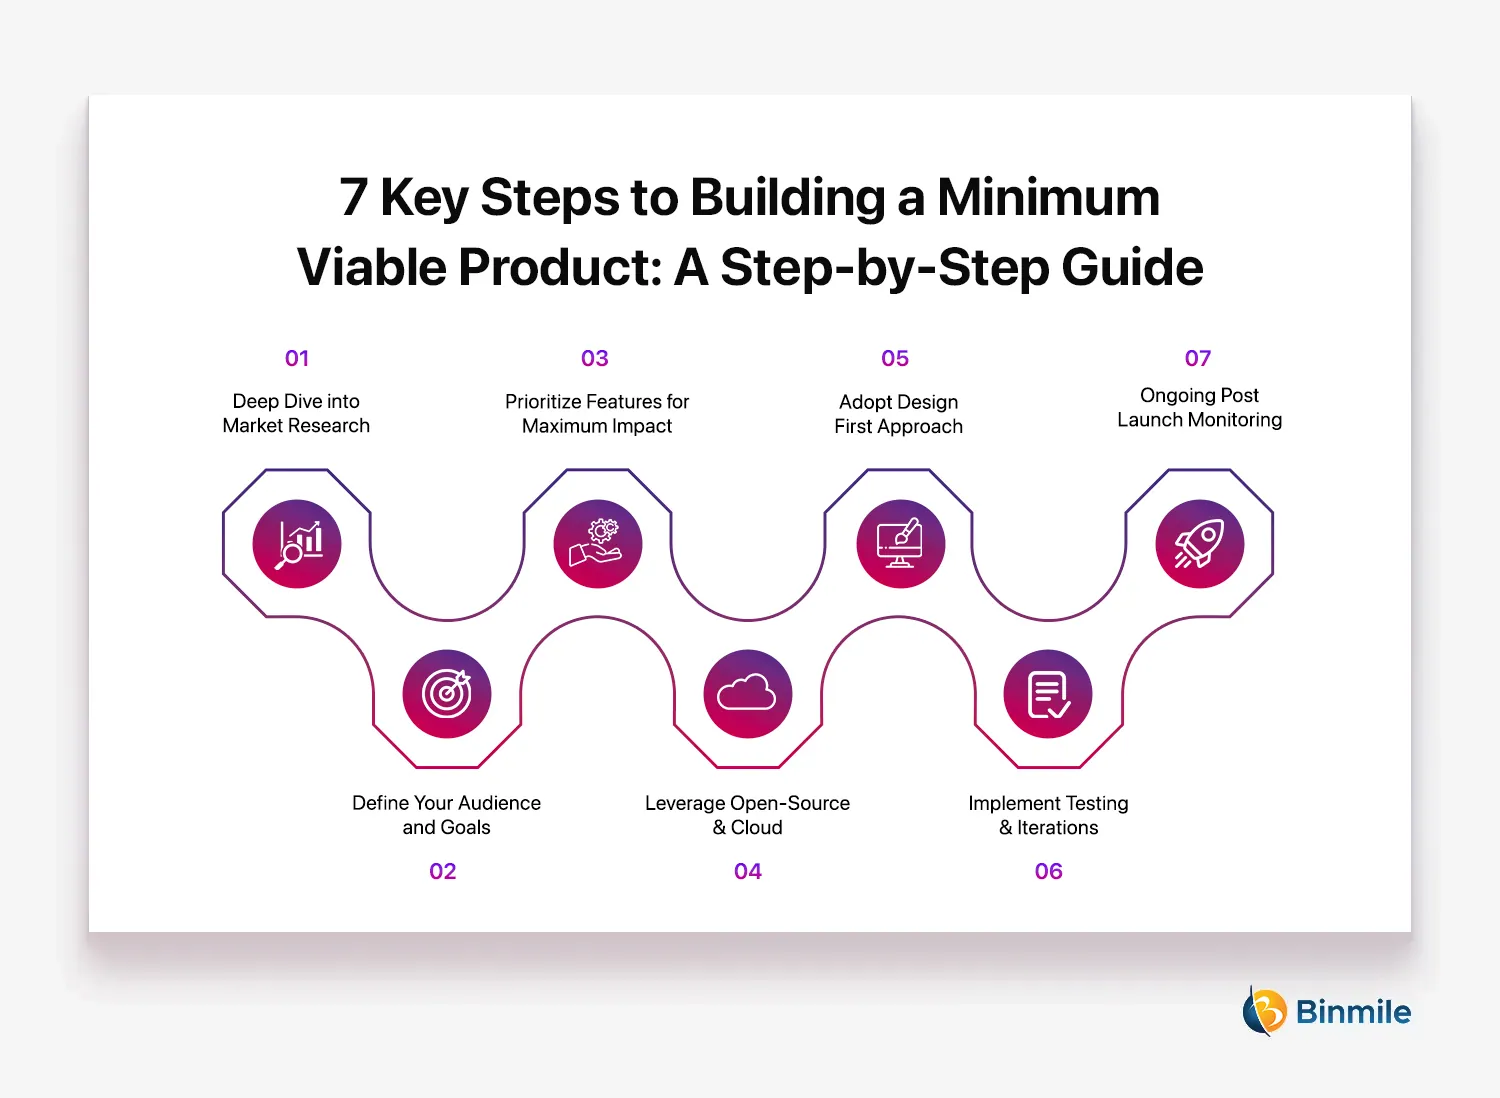 7 Key Steps to Building a Minimum Viable Product | Step-by-Step Guide | Binmile